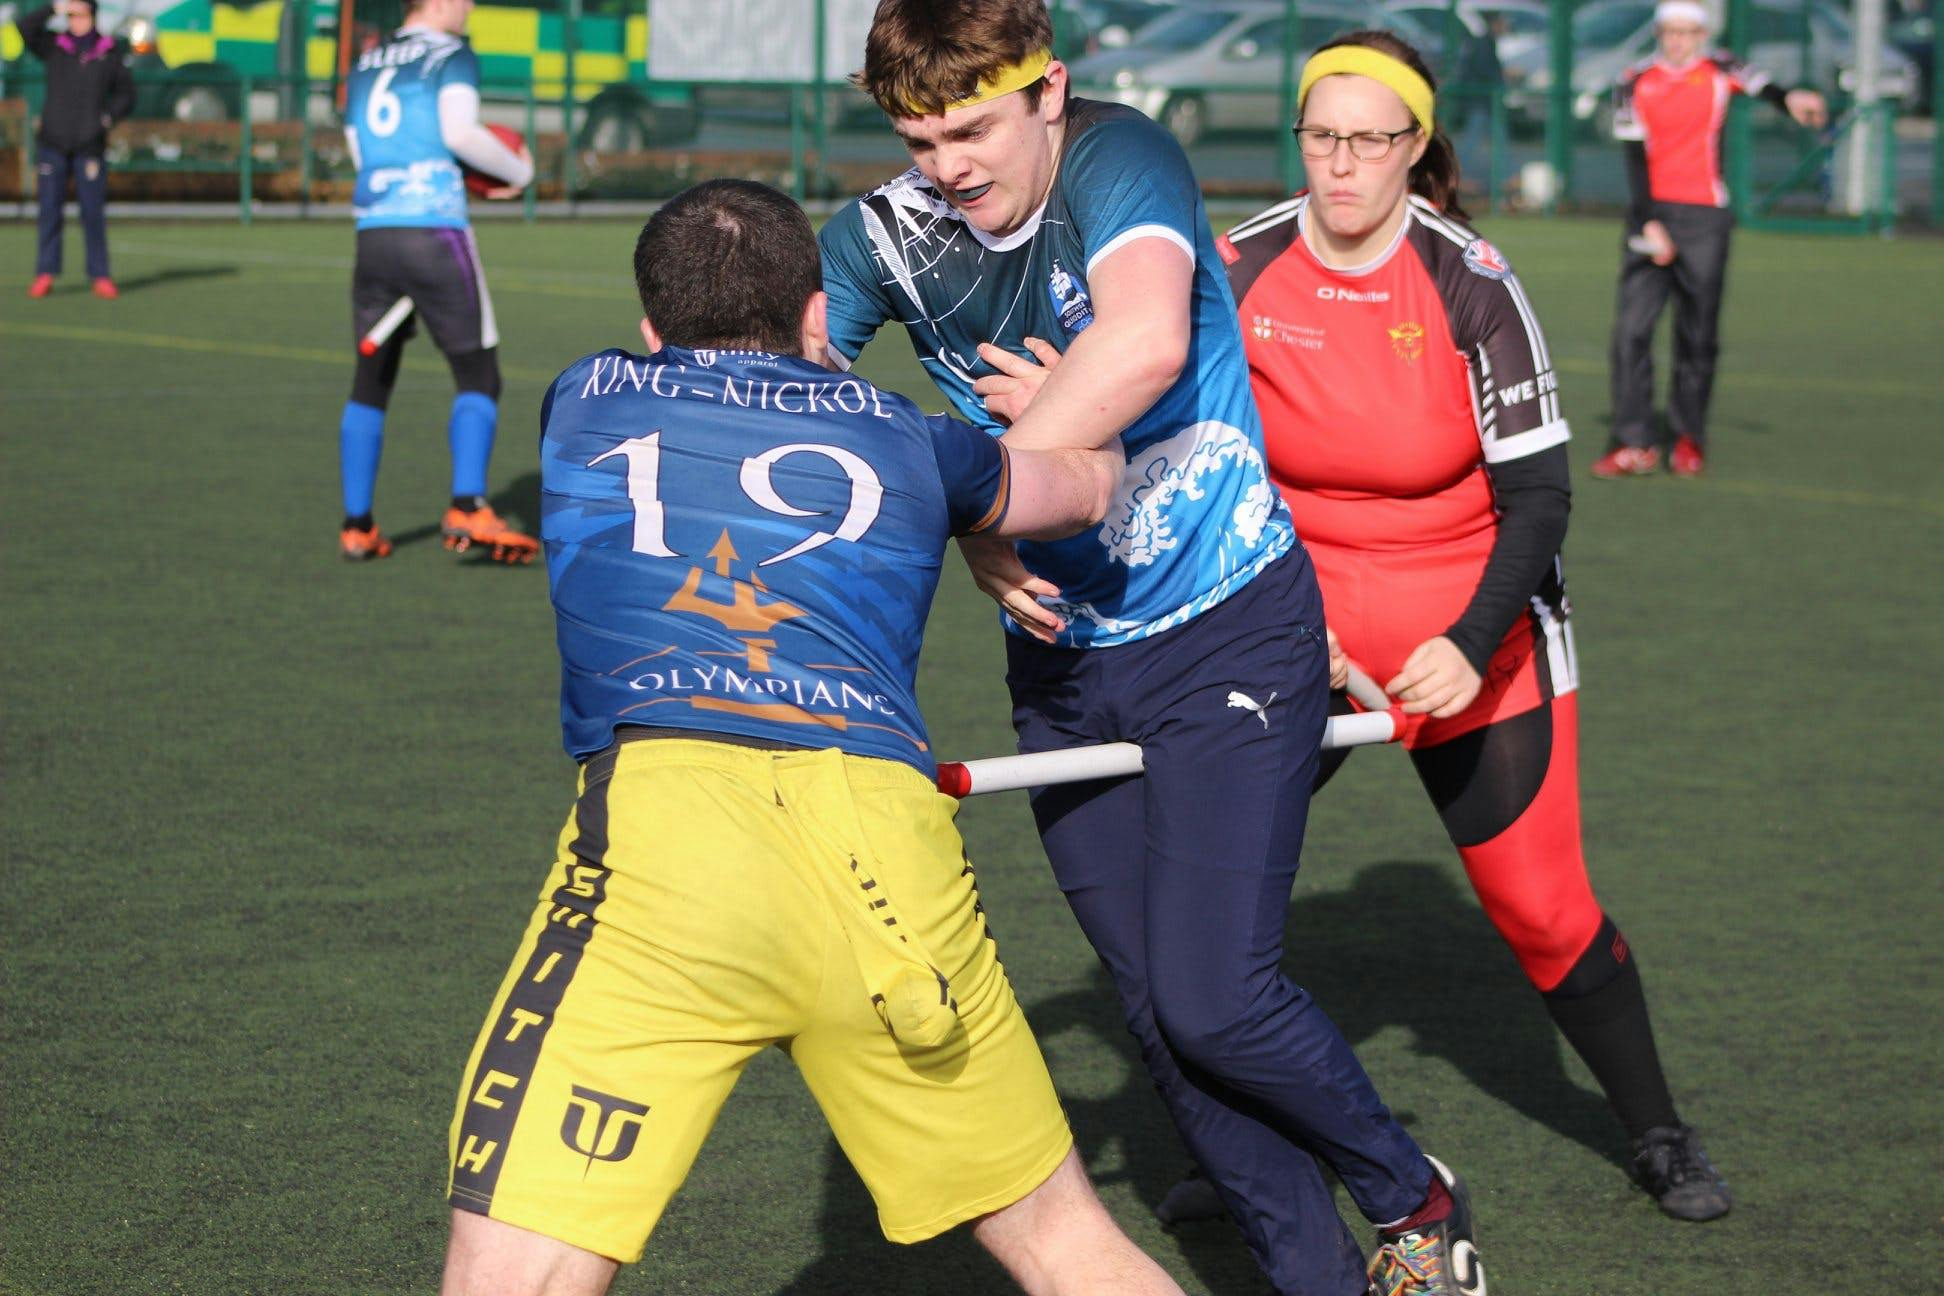 A Southsea seeker wrestles with the snitch, James King-Nicholls, attempting to catch while a Chester seeker is blocked.